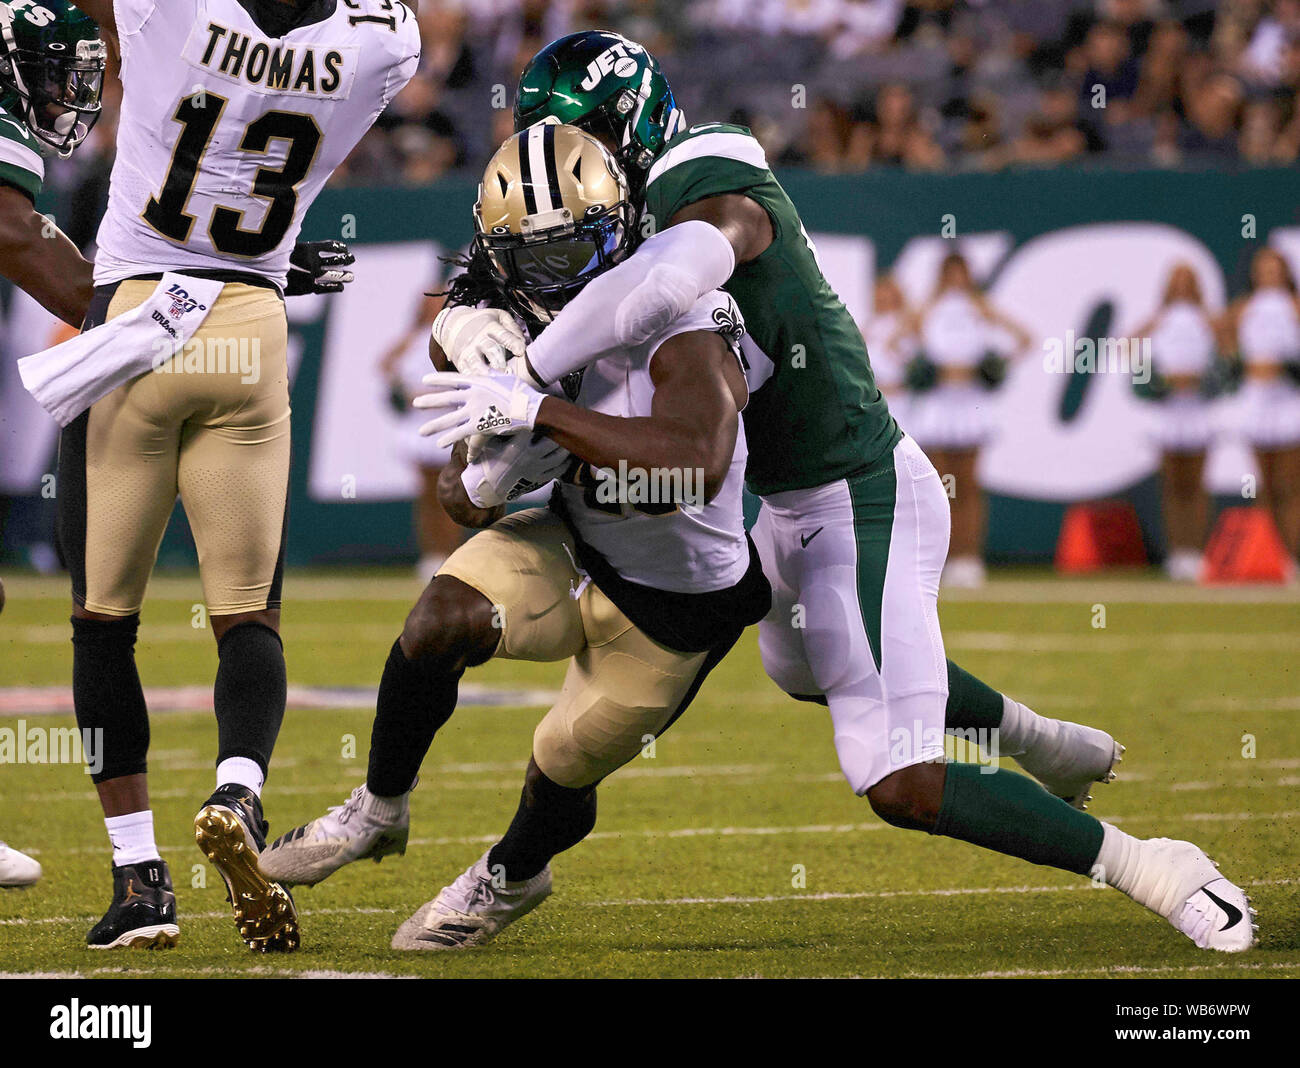 East Rutherford, New Jersey, USA. 24th August, 2019. : New Orleans Saints  running back Alvin Kamara (41) is tackled by New York Jets linebacker  Neville Hewitt (46) during a preseason game between